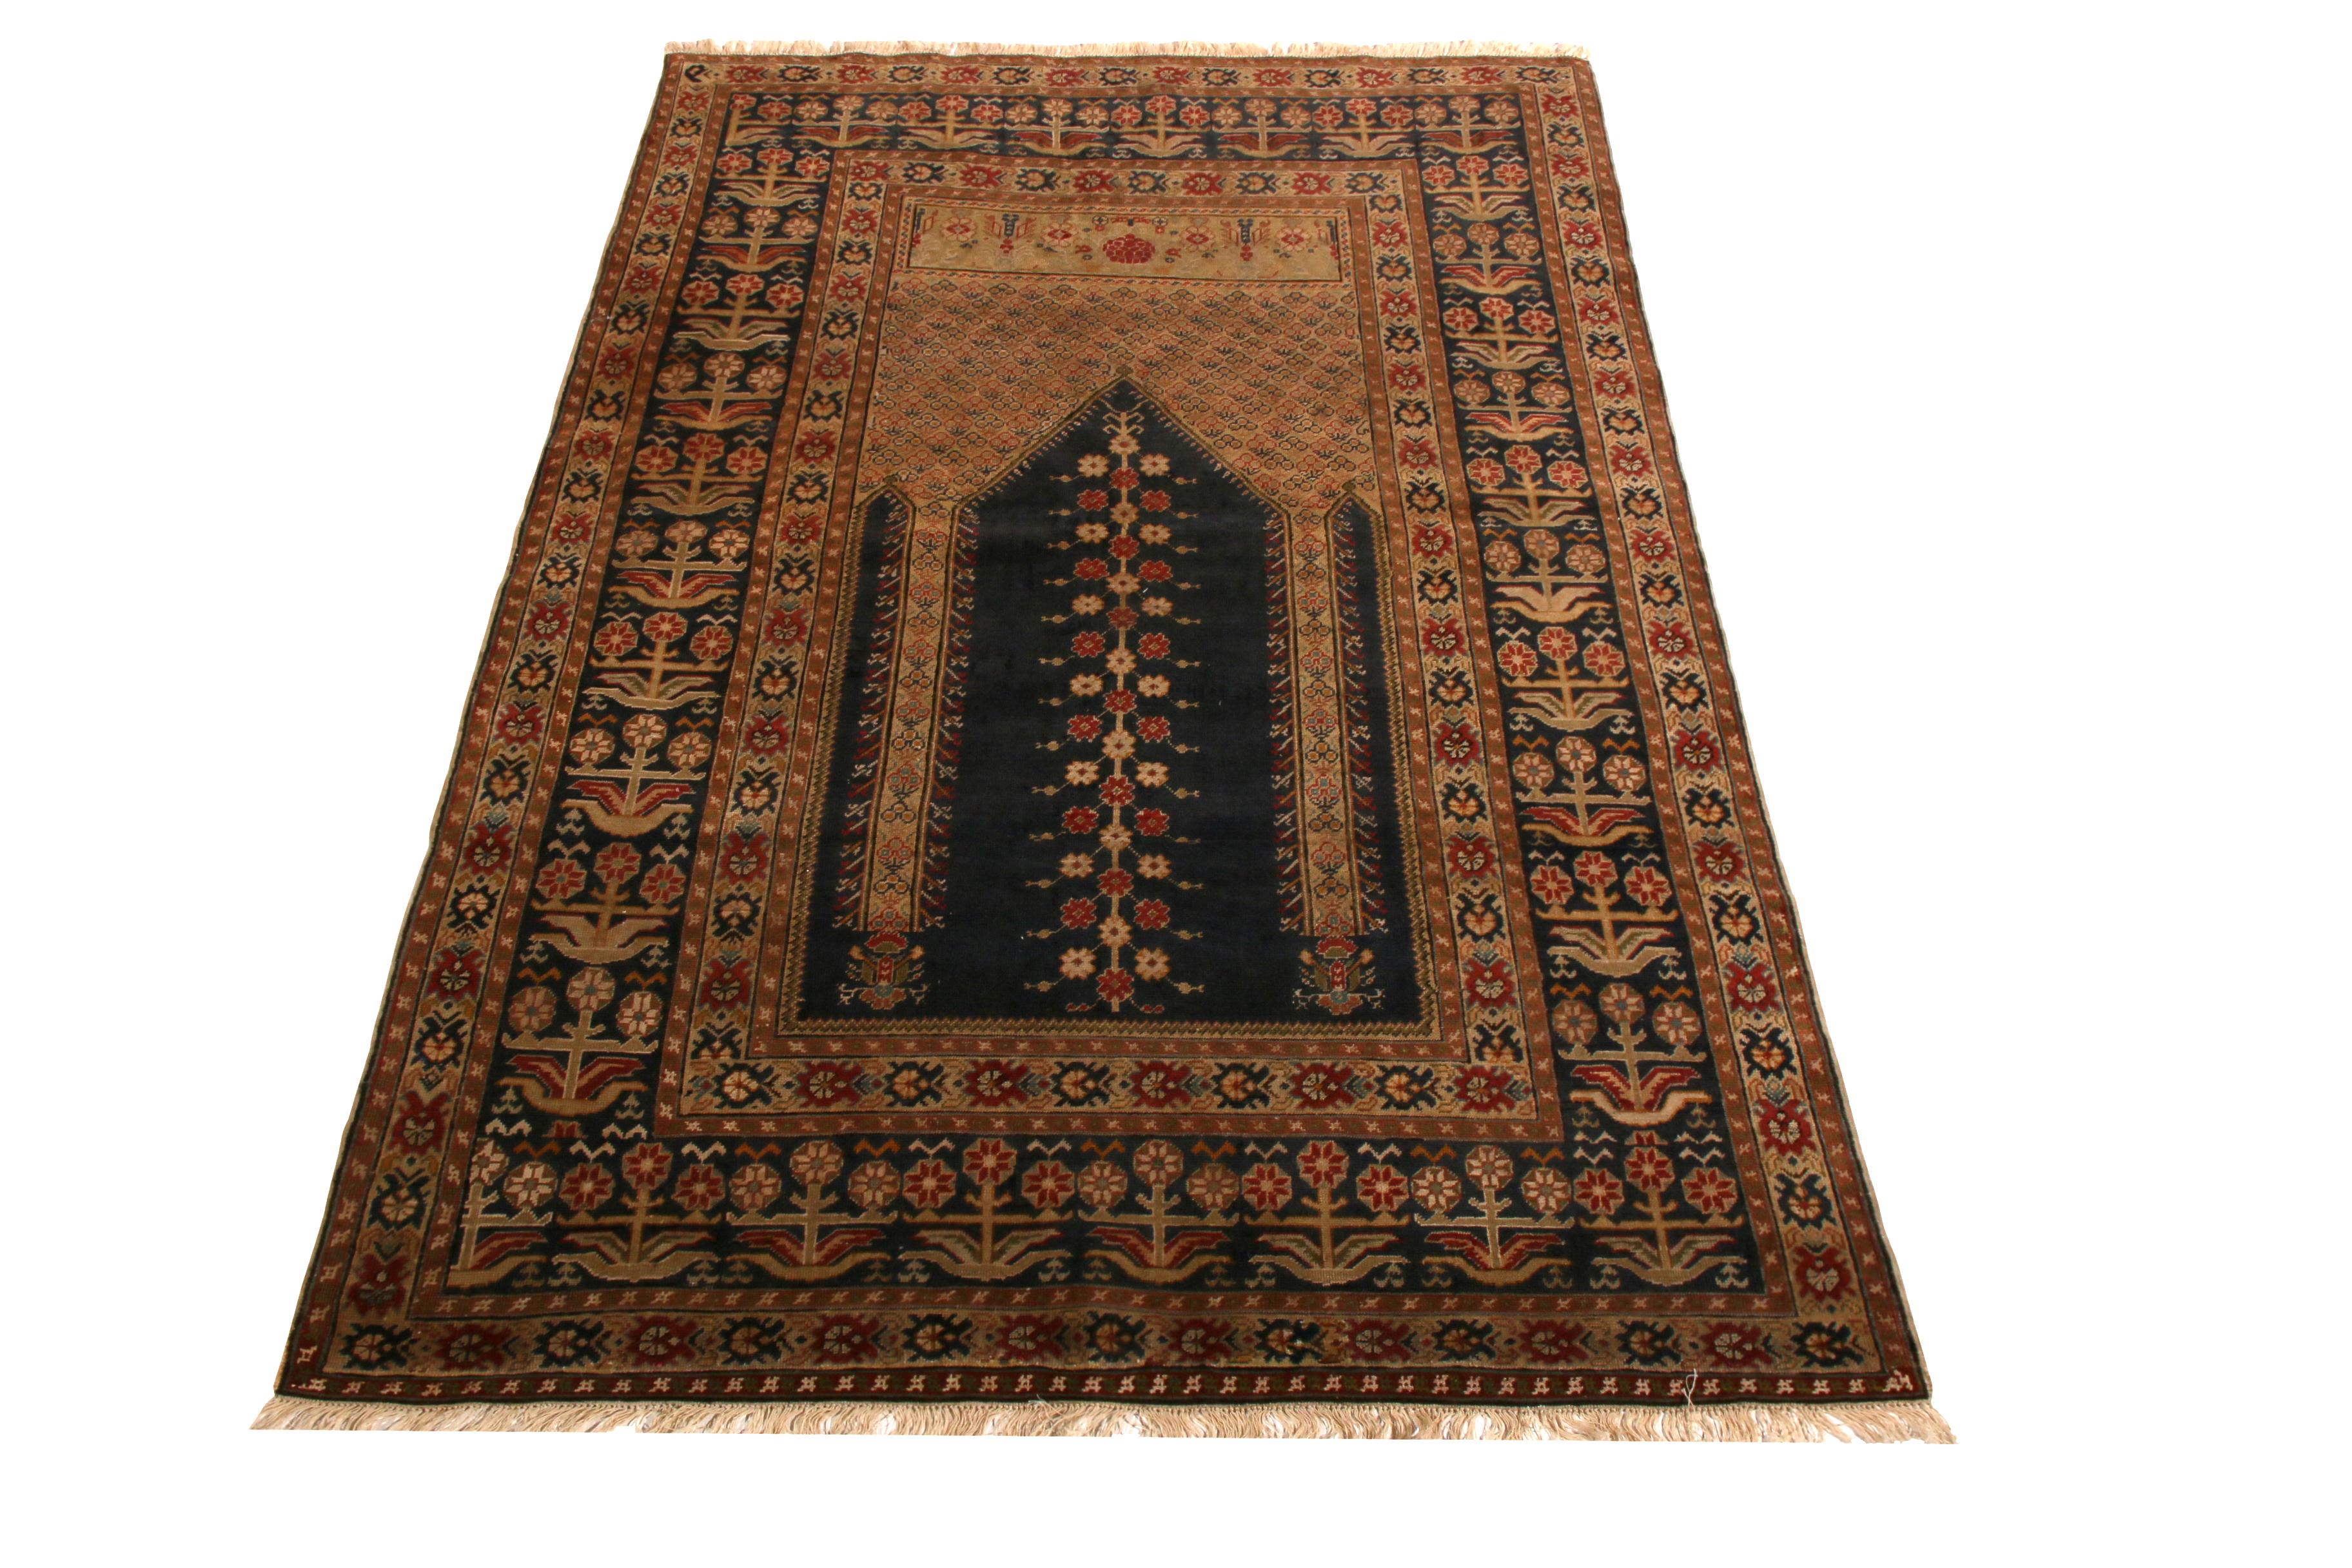 Hand knotted with wool originating from Turkey between 1880-1890, this antique rug hails from the Ghiordes region of former Anatolia, renowned among Classic and traditional rug families for a history of craftsmanship. Employing the celebrated mihrab